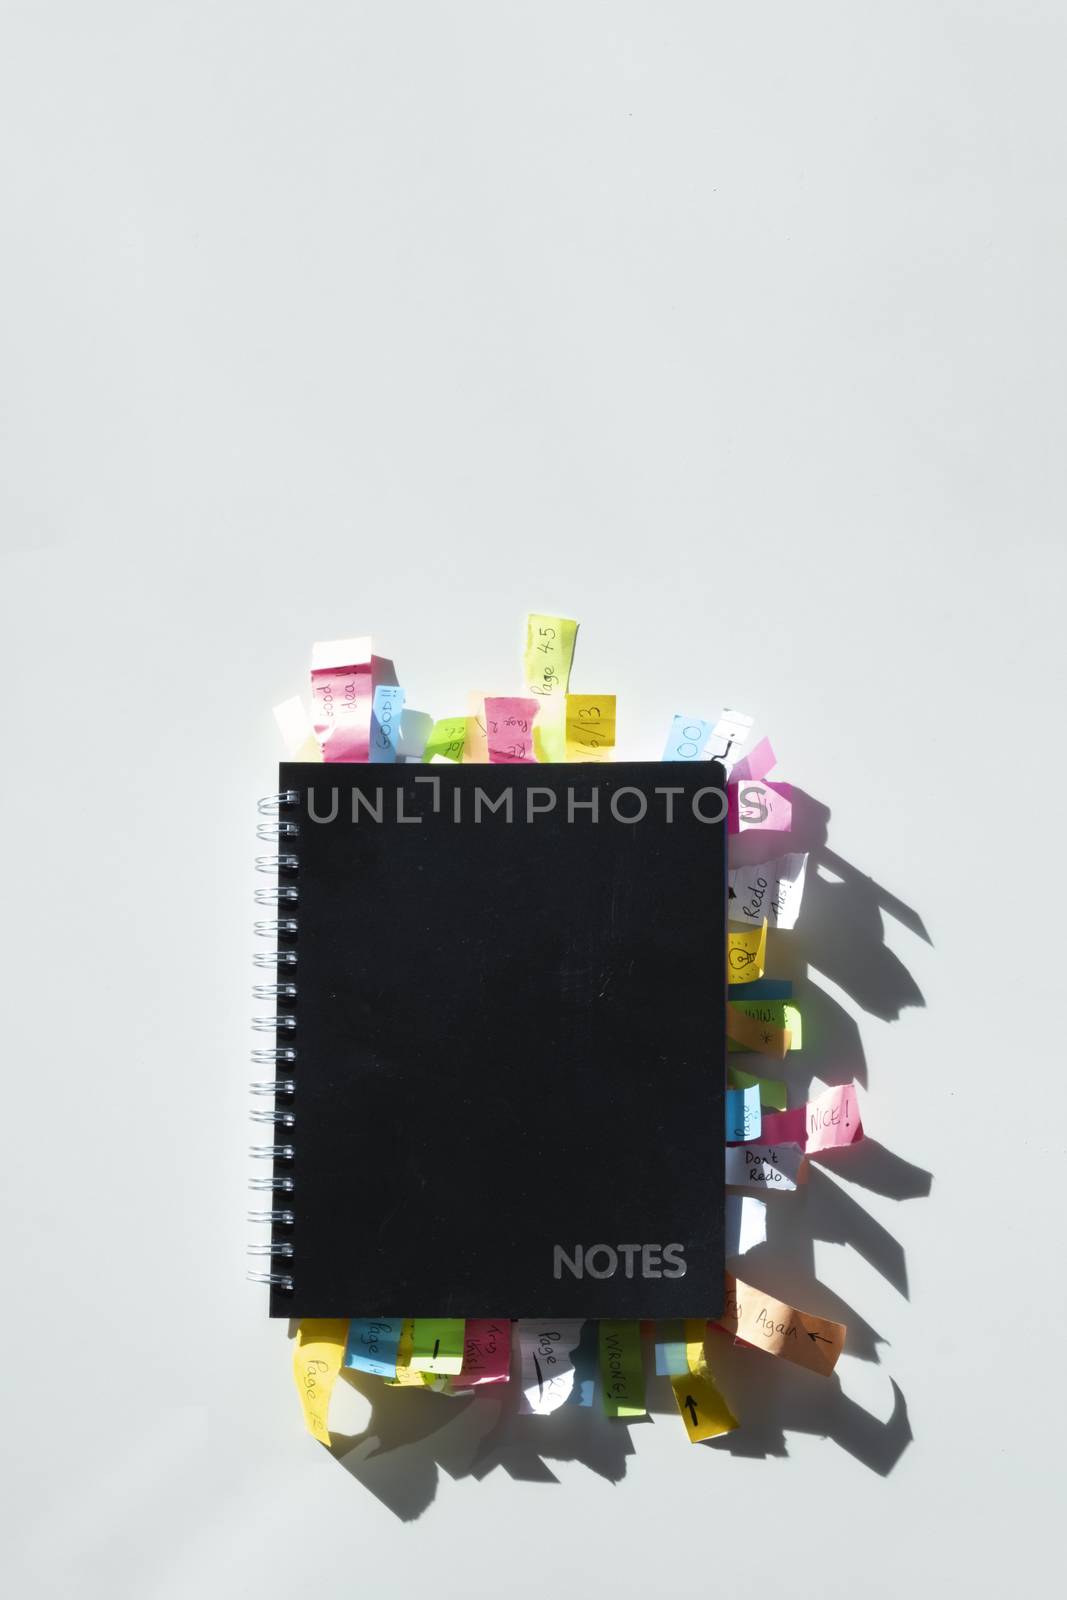 Top view of a note pad full of sticky notes